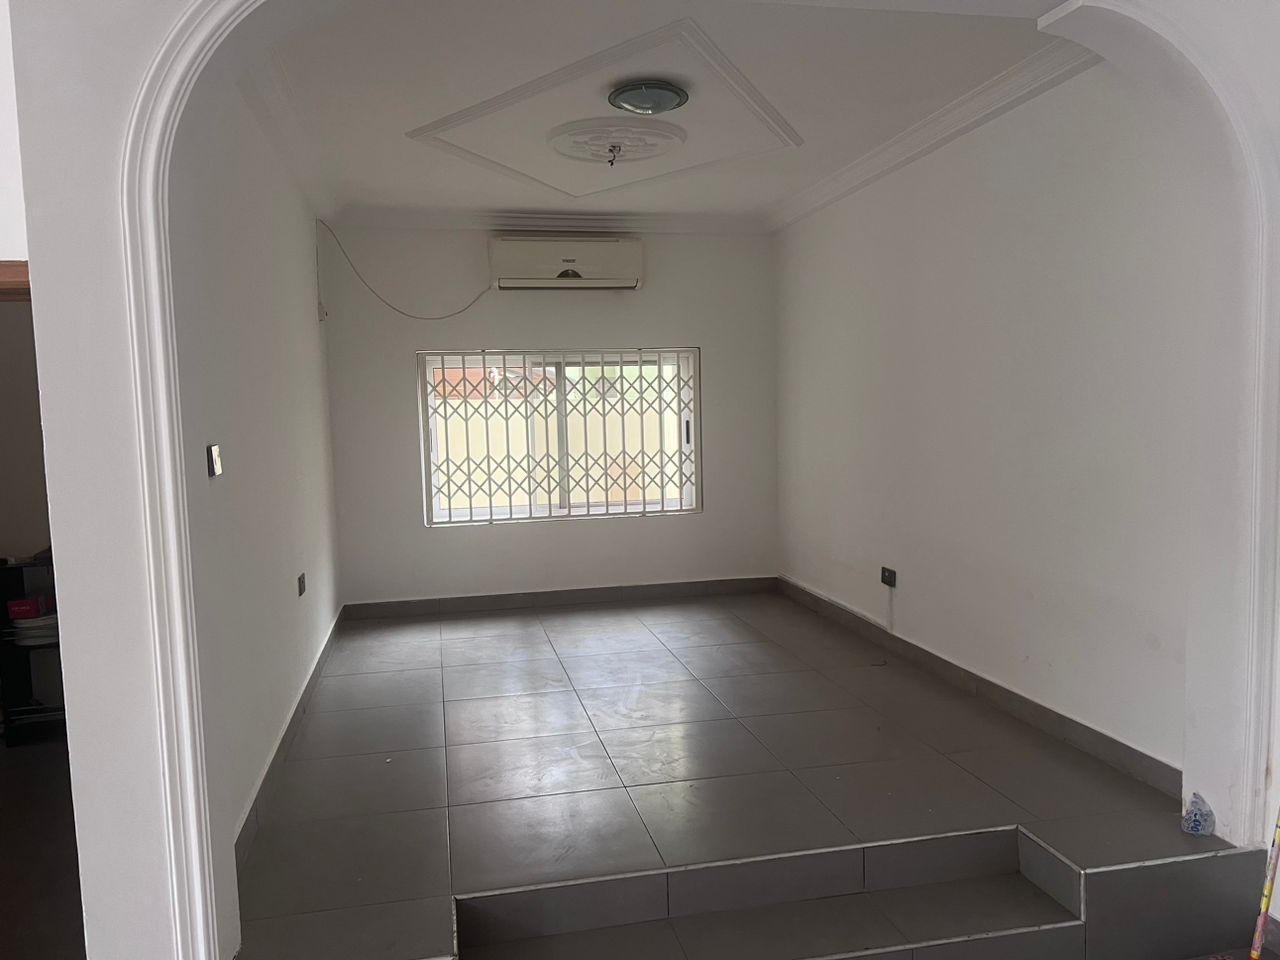 Four 4-Bedroom House for Rent in a Gated Community at Spintex